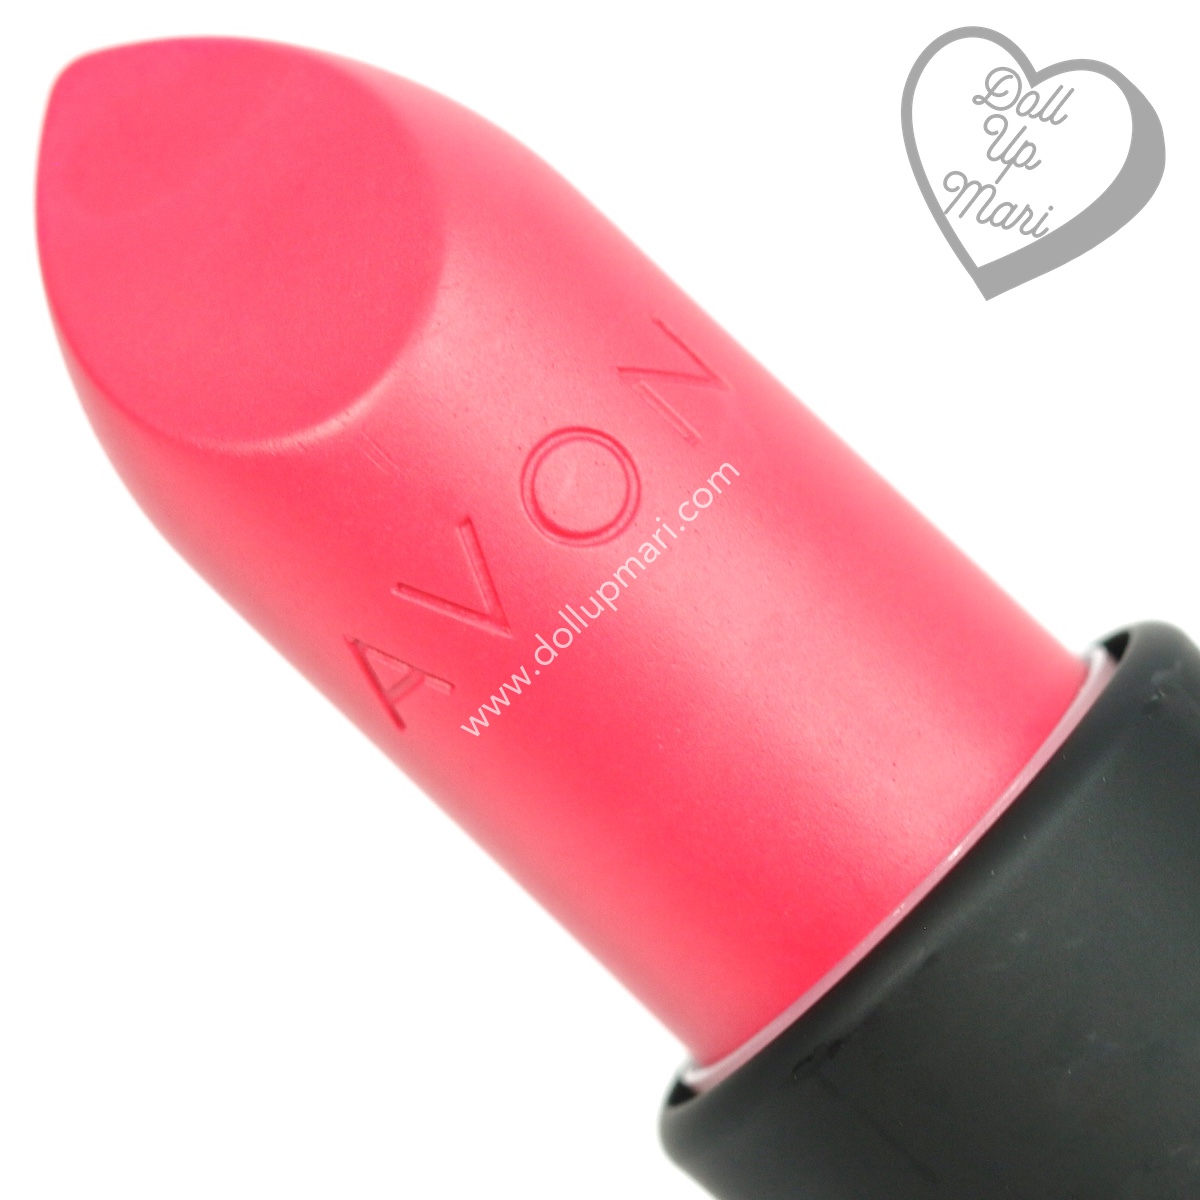 zoom in of Vibrant Melon shade of AVON Perfectly Matte Lipstick